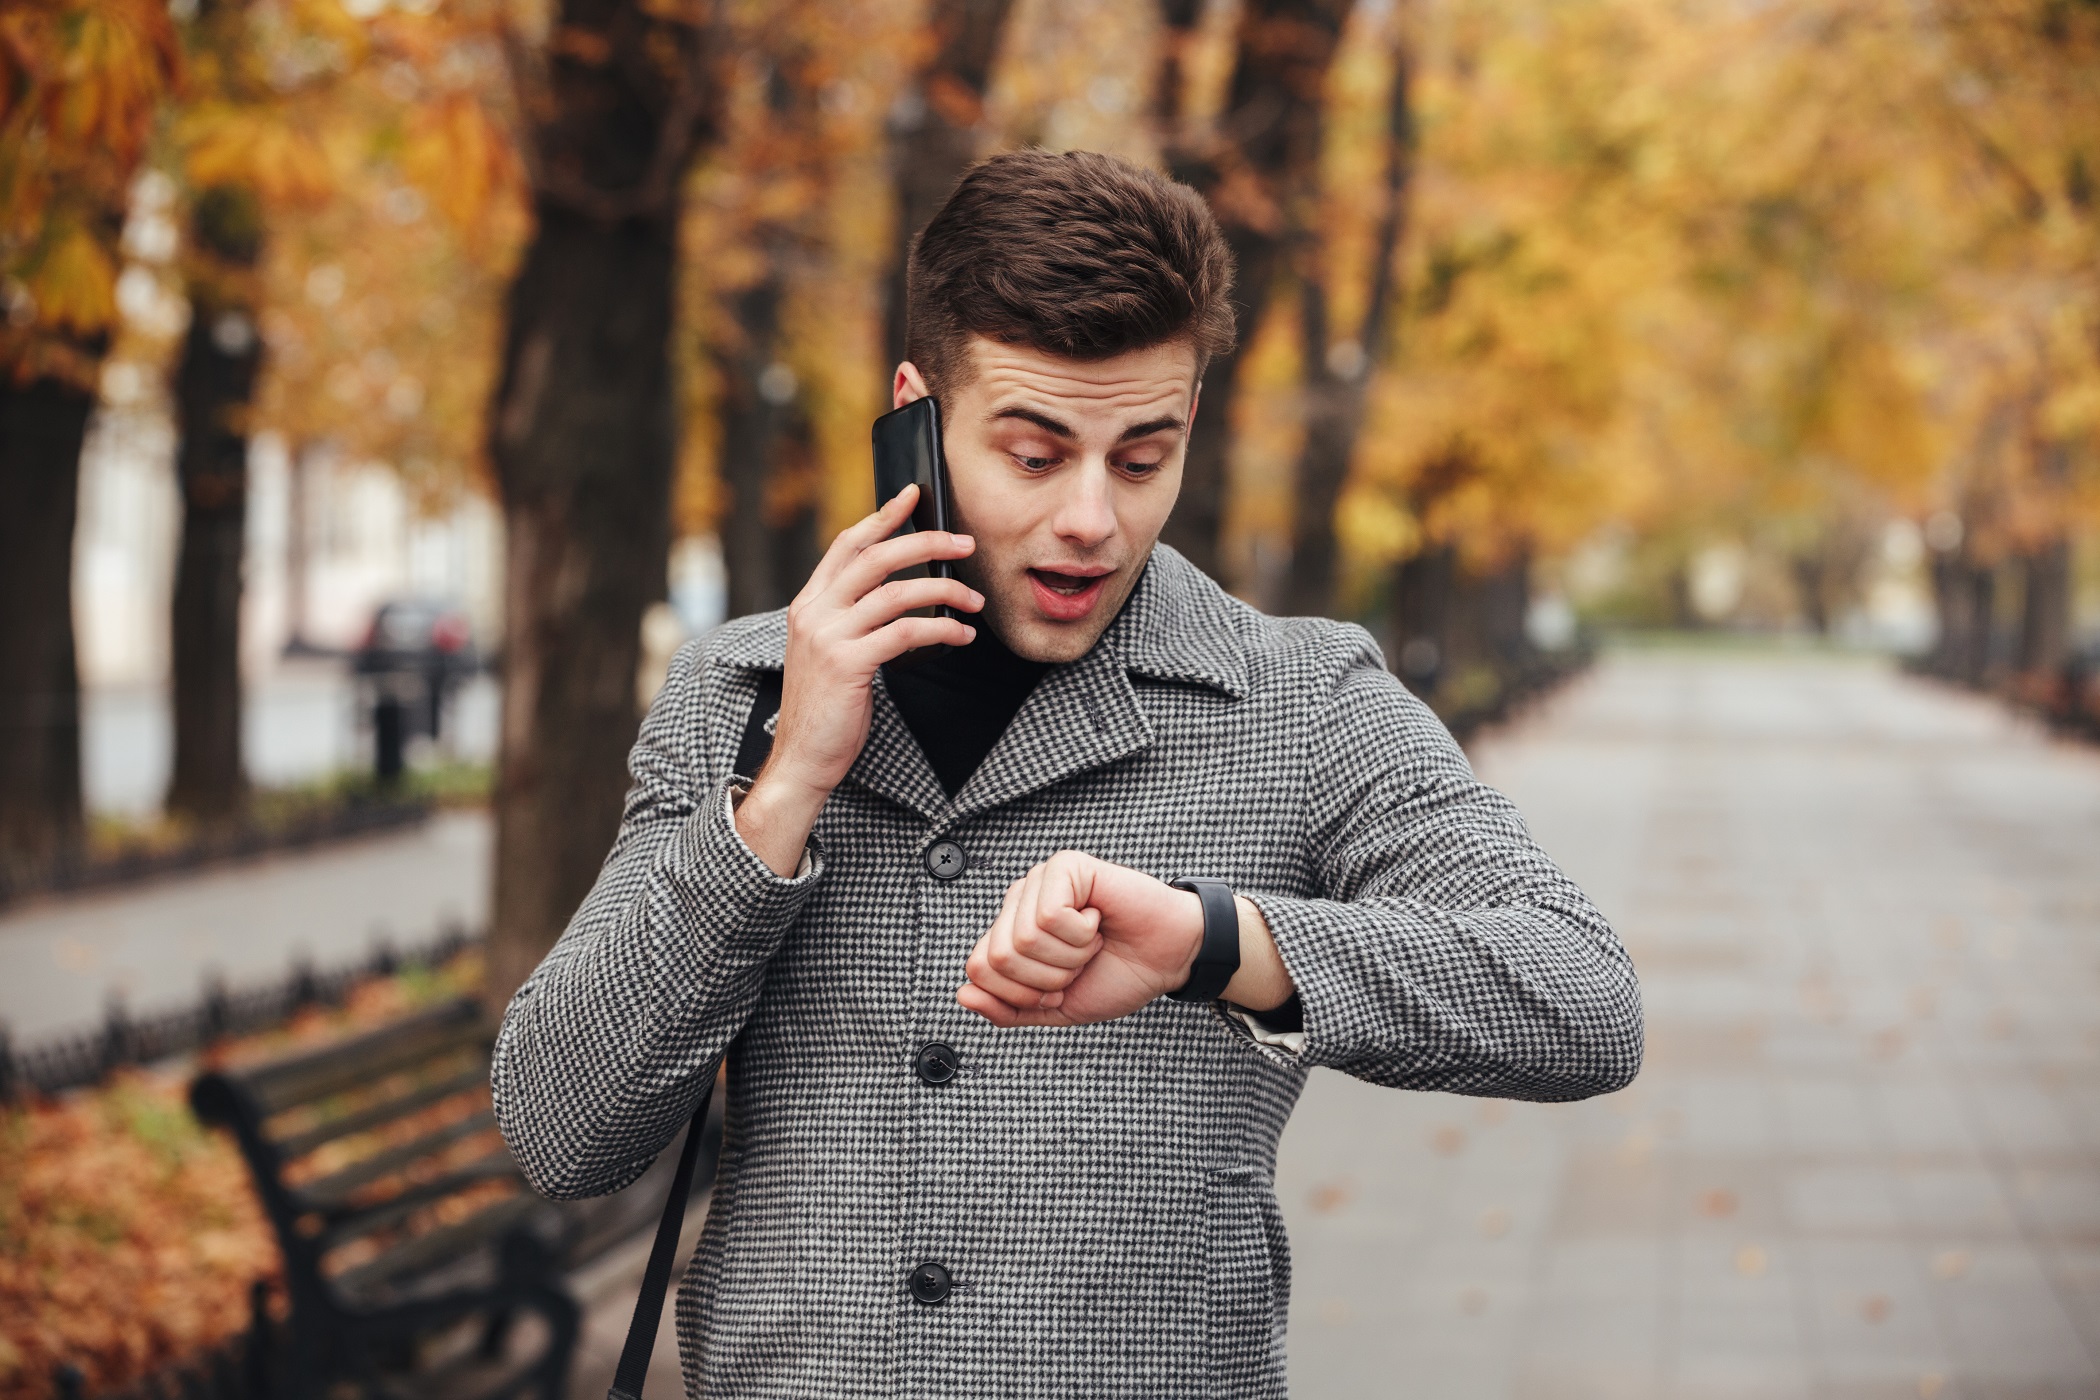 picture-young-guy-talking-smartmobile-while-looking-his-watch-being-late_drobotdean_freepik.jpg